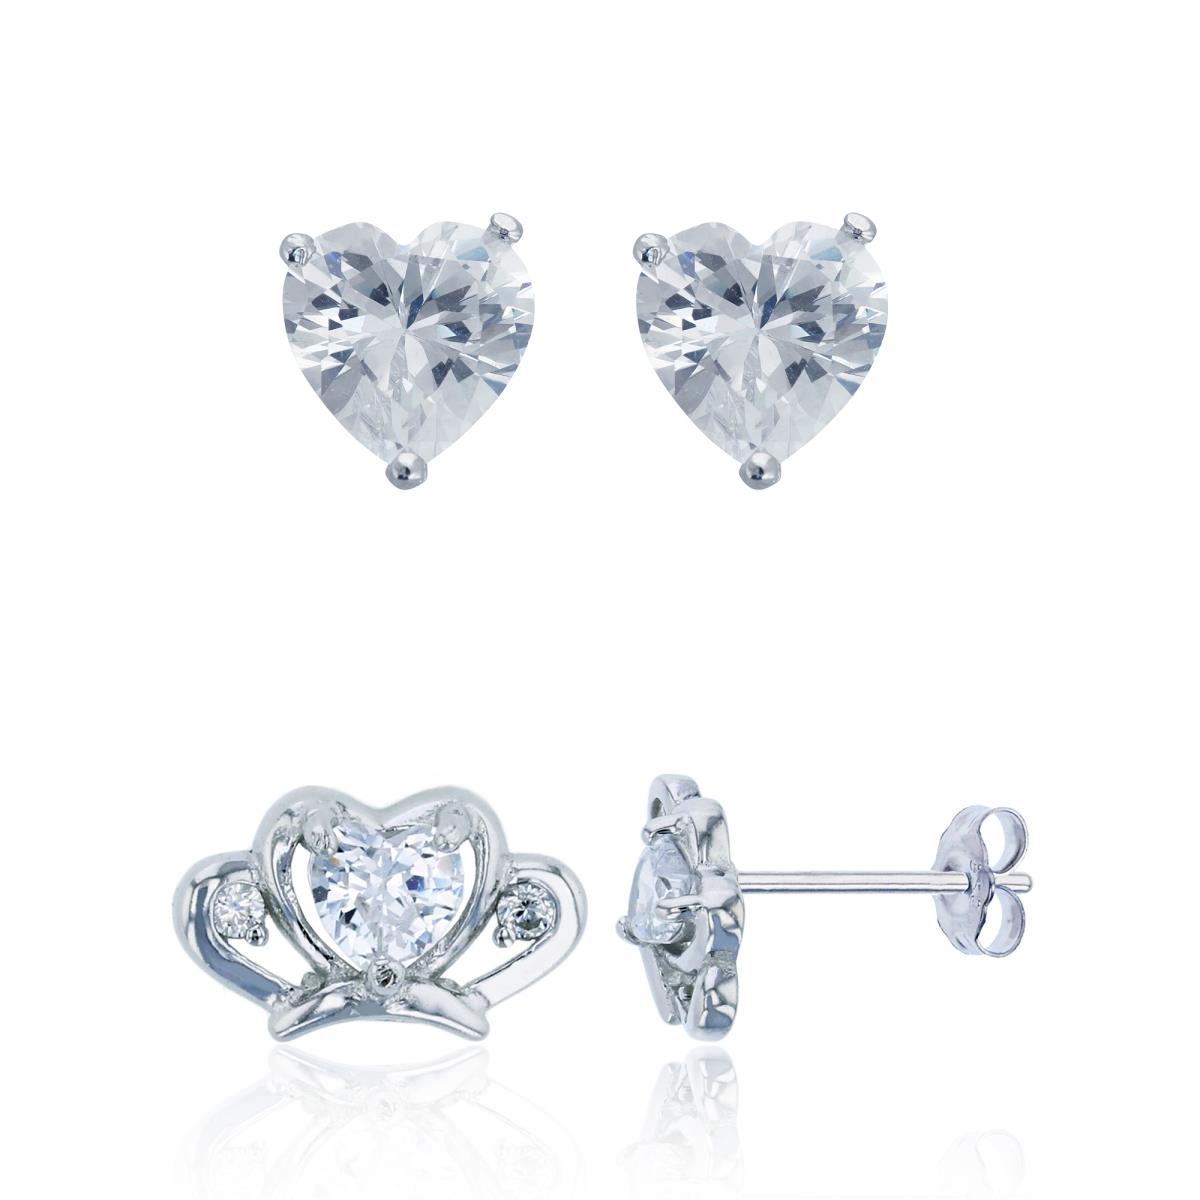 Sterling Silver Micropave Princess Crown & 6x6mm AAA Heart Solitaire Stud Earring Set